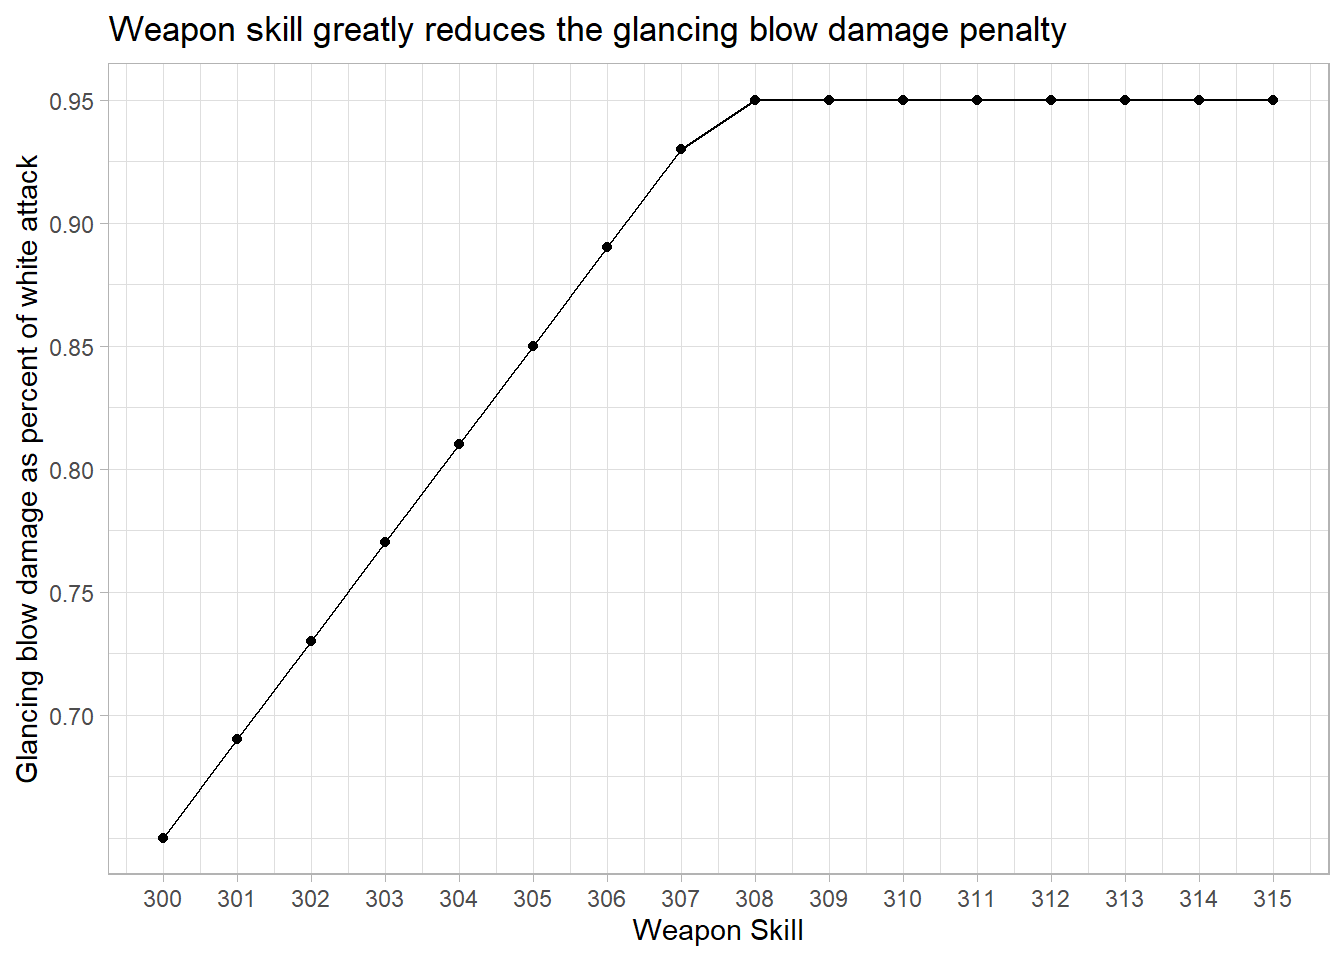 Weapon skill greatly reduces the glancing blow damage penalty